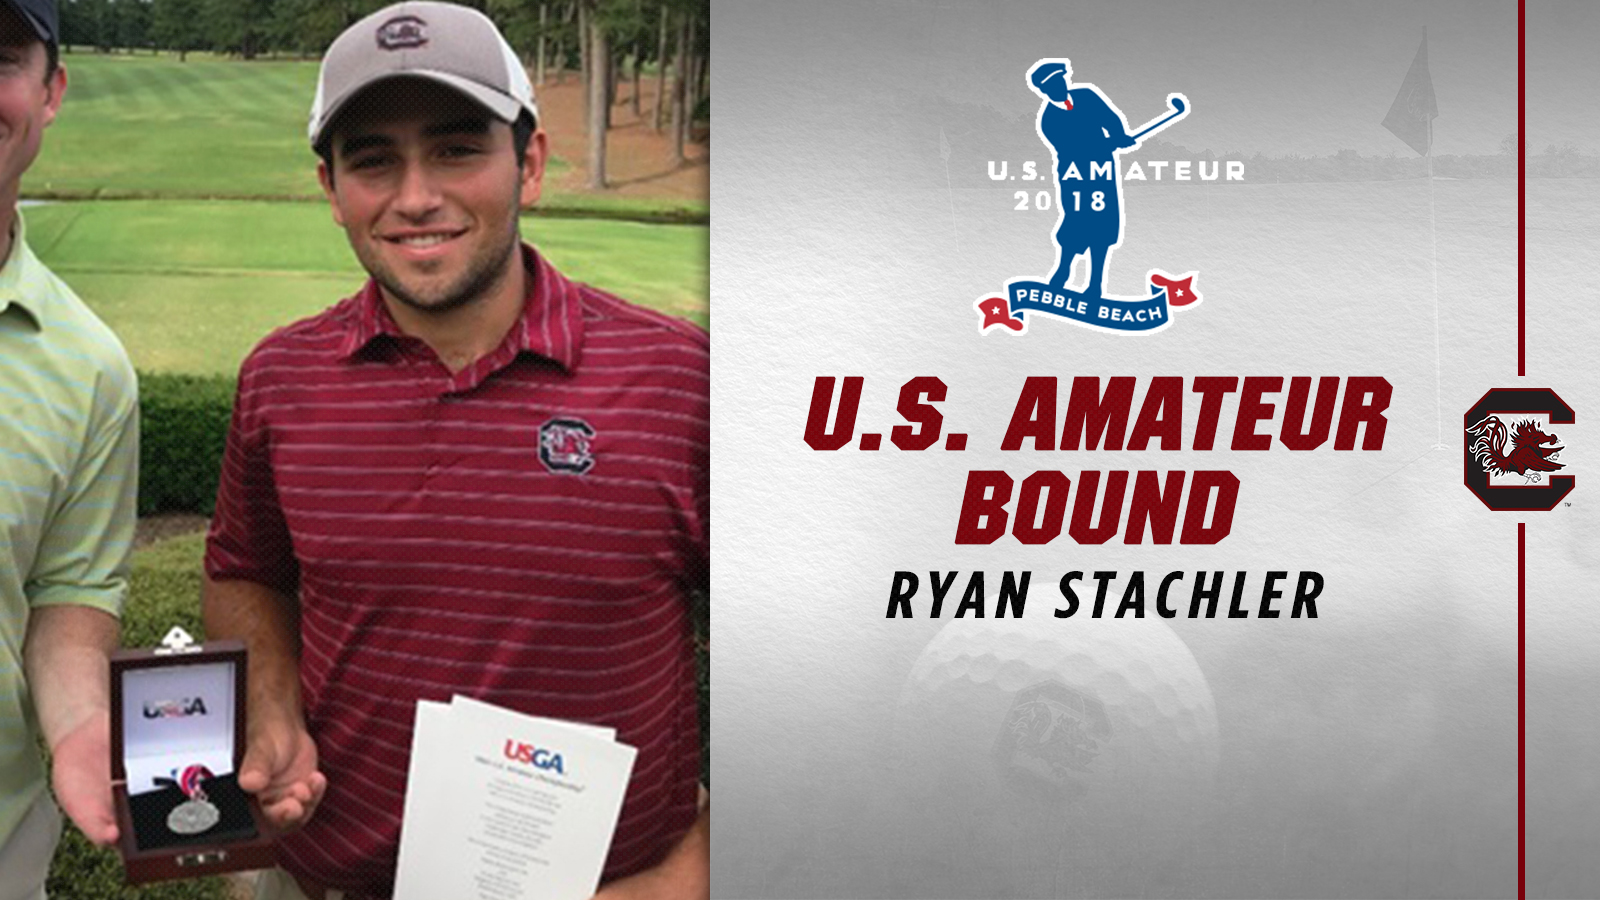 Stachler headed to Pebble Beach for U.S. Amateur